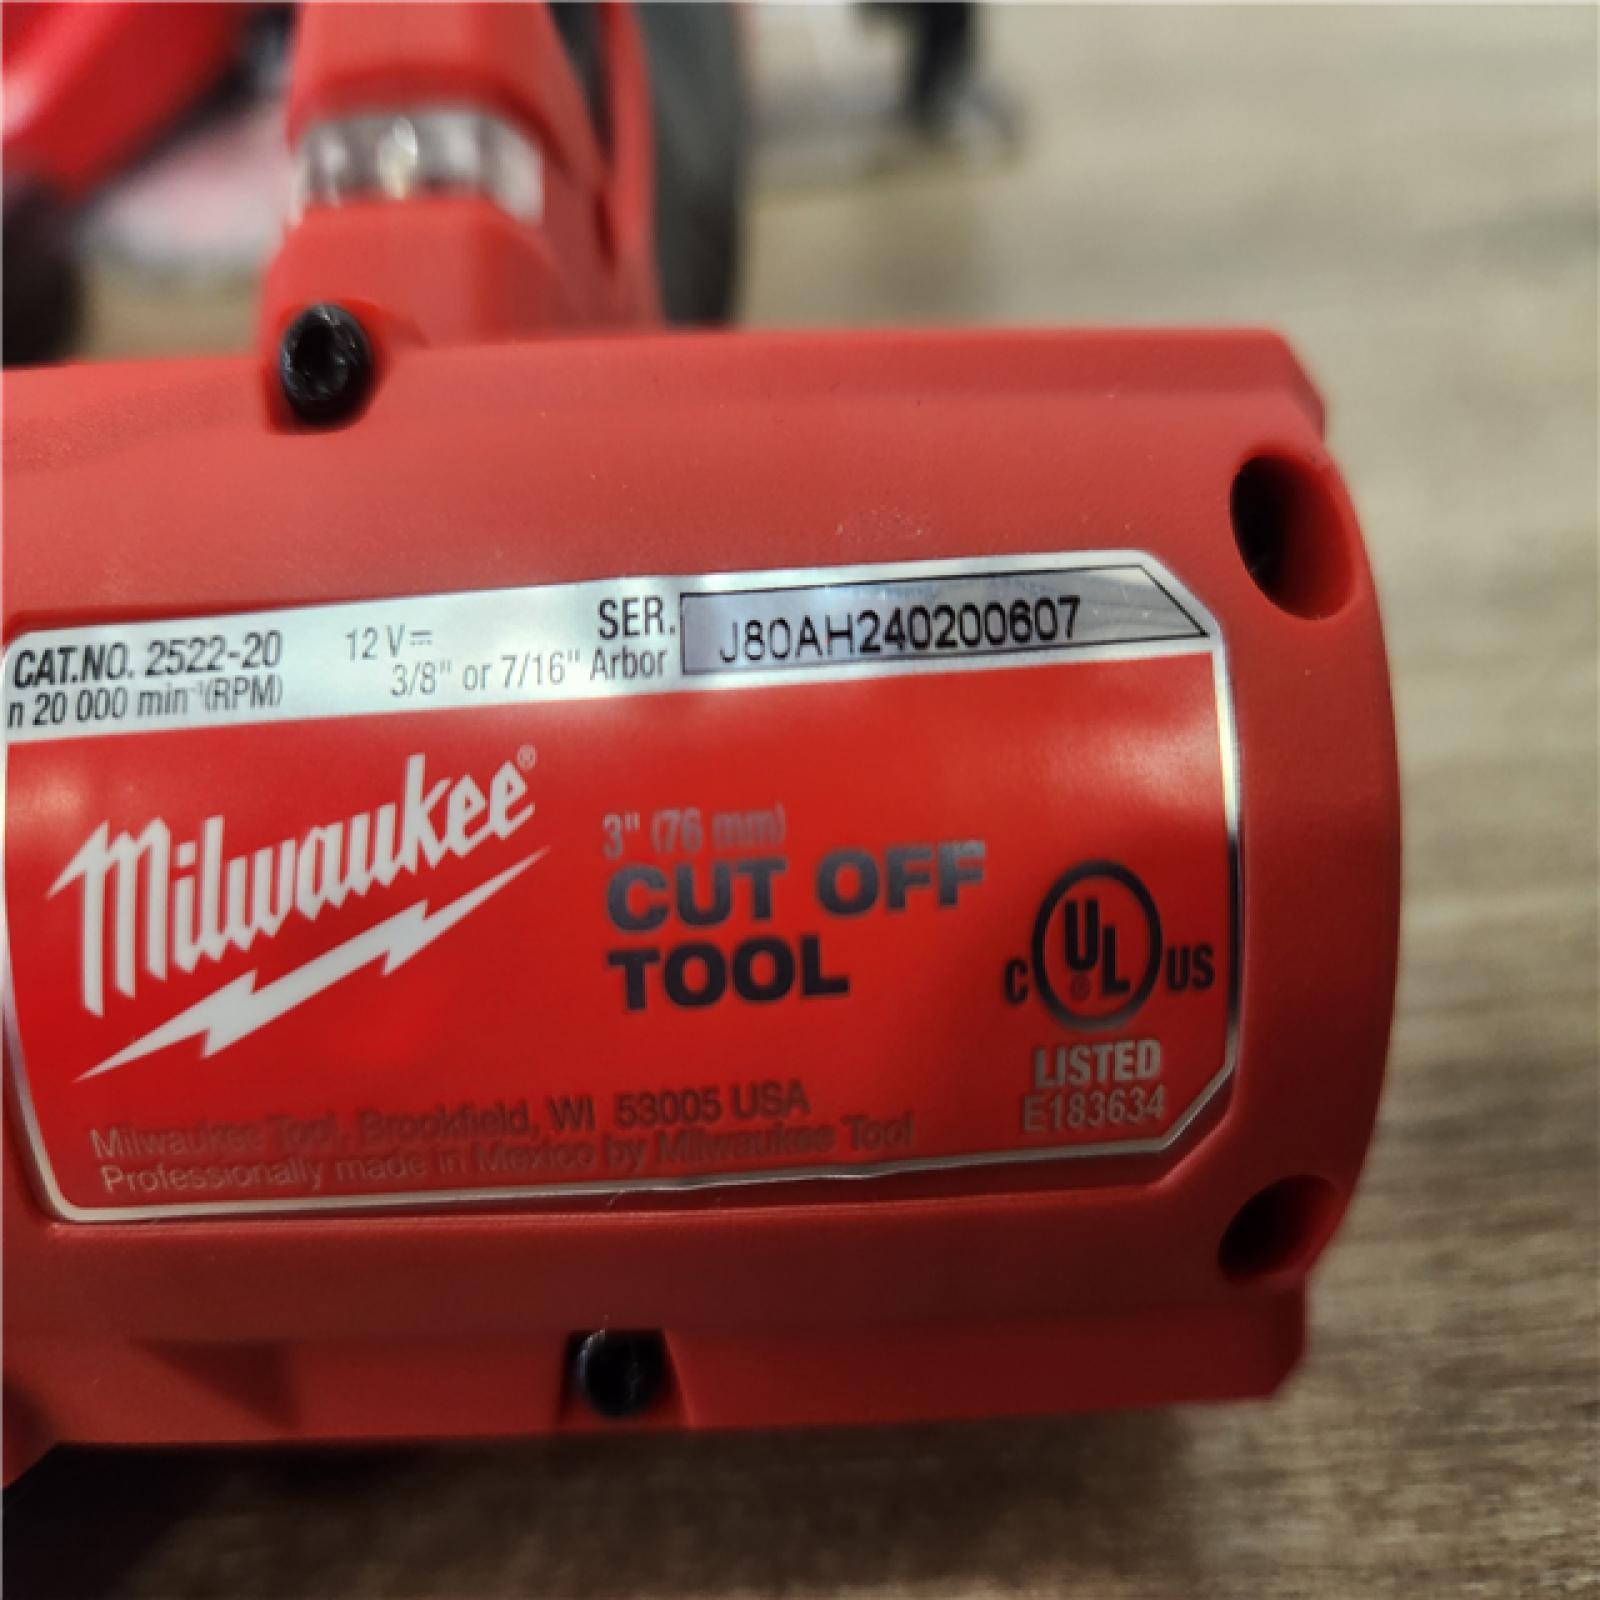 Phoenix Location NEW Milwaukee M12 FUEL 12V 3 in. Lithium-Ion Brushless Cordless Cut Off Saw Kit with One 4.0 Ah Battery Charger and Bag